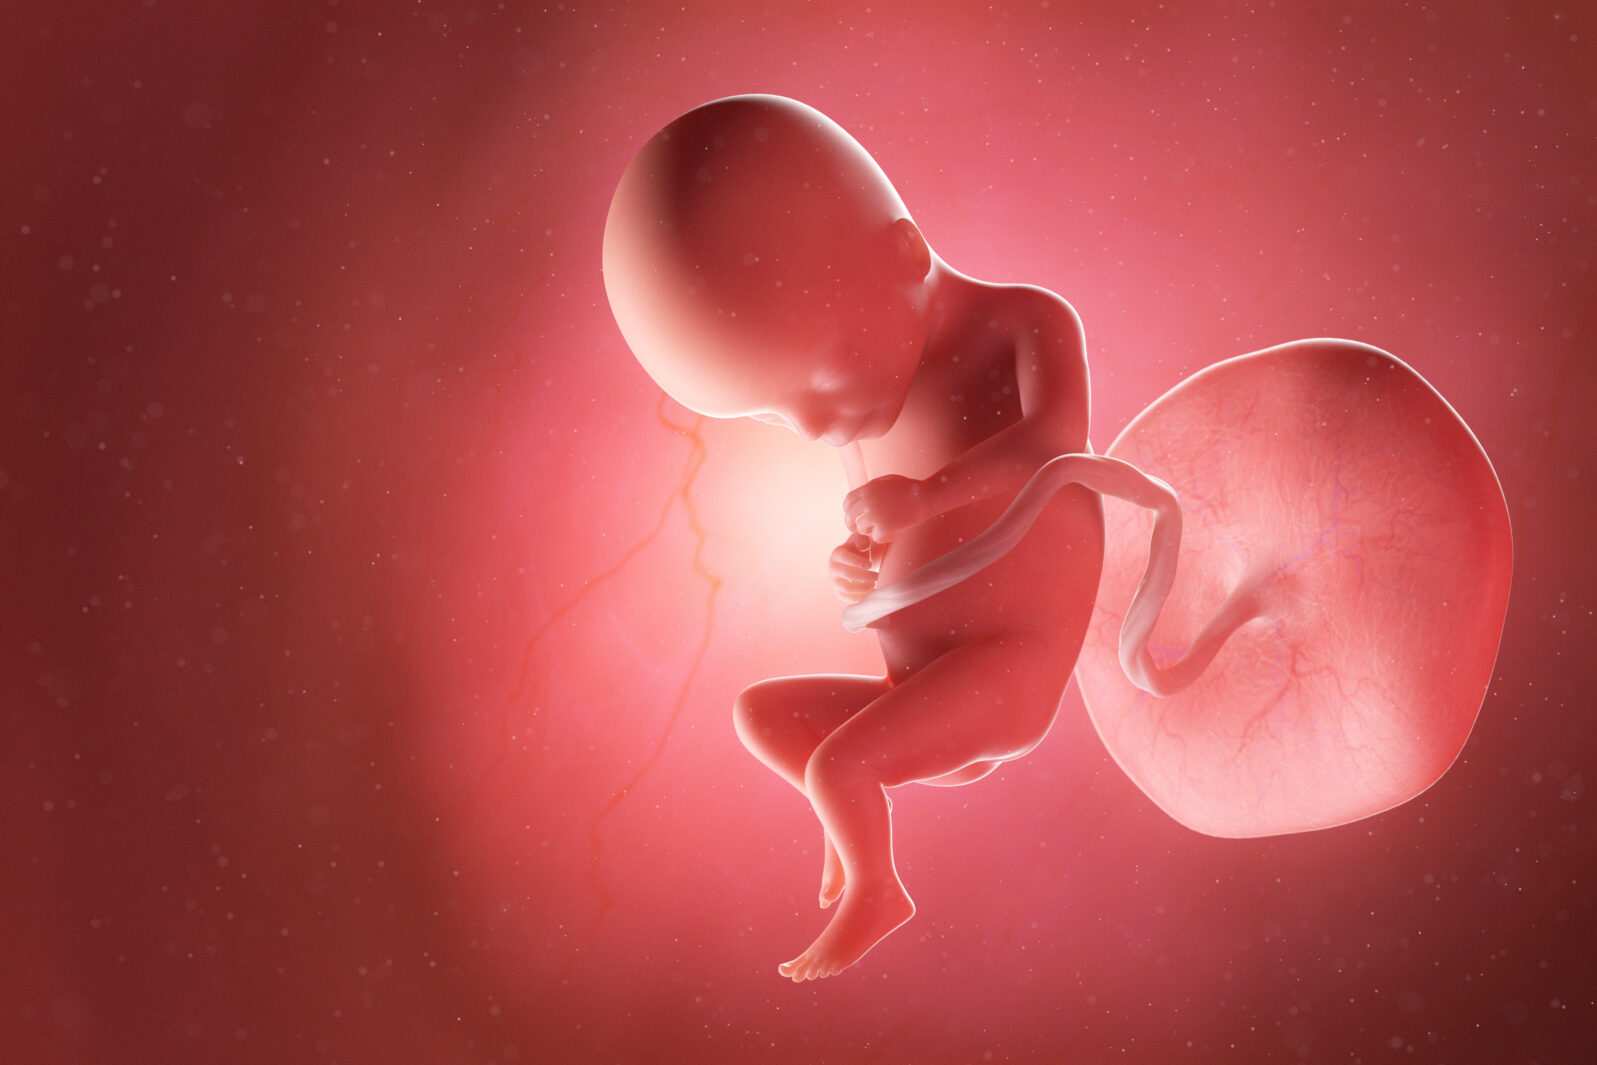 3d rendered medically accurate illustration of a fetus at week 17